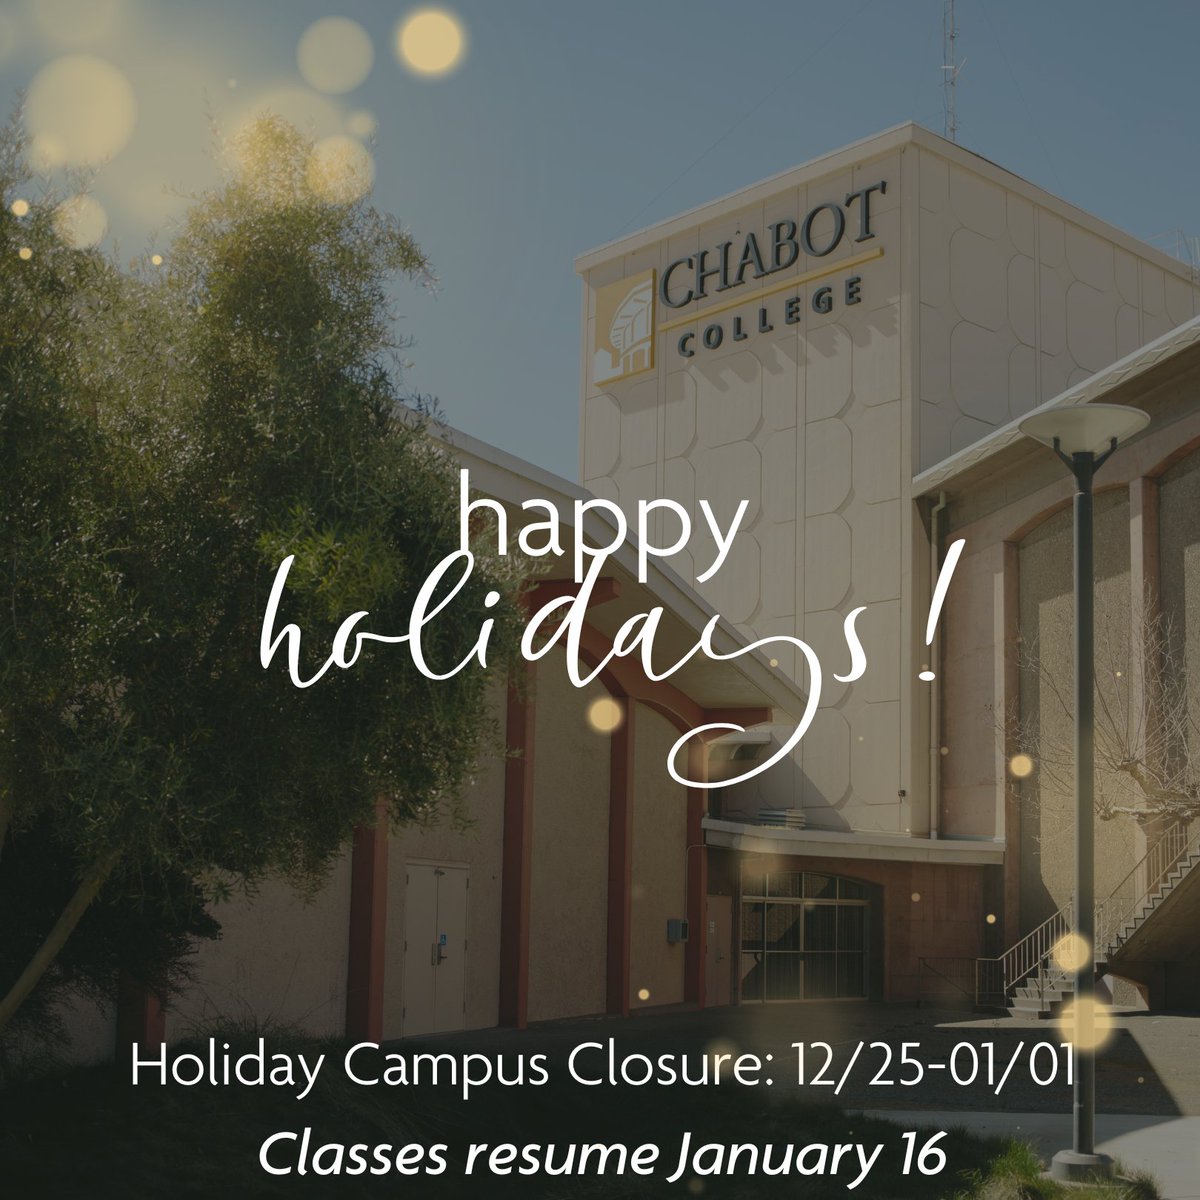 Happy holidays, Gladiators! As a reminder, campus is closed for the holidays from 12/25-01/01. We can't wait to see you back on campus for the start of classes on January 16! If you aren't registered for spring semester, enroll here! chabotcollege.edu/admissions/reg… #happyholidays